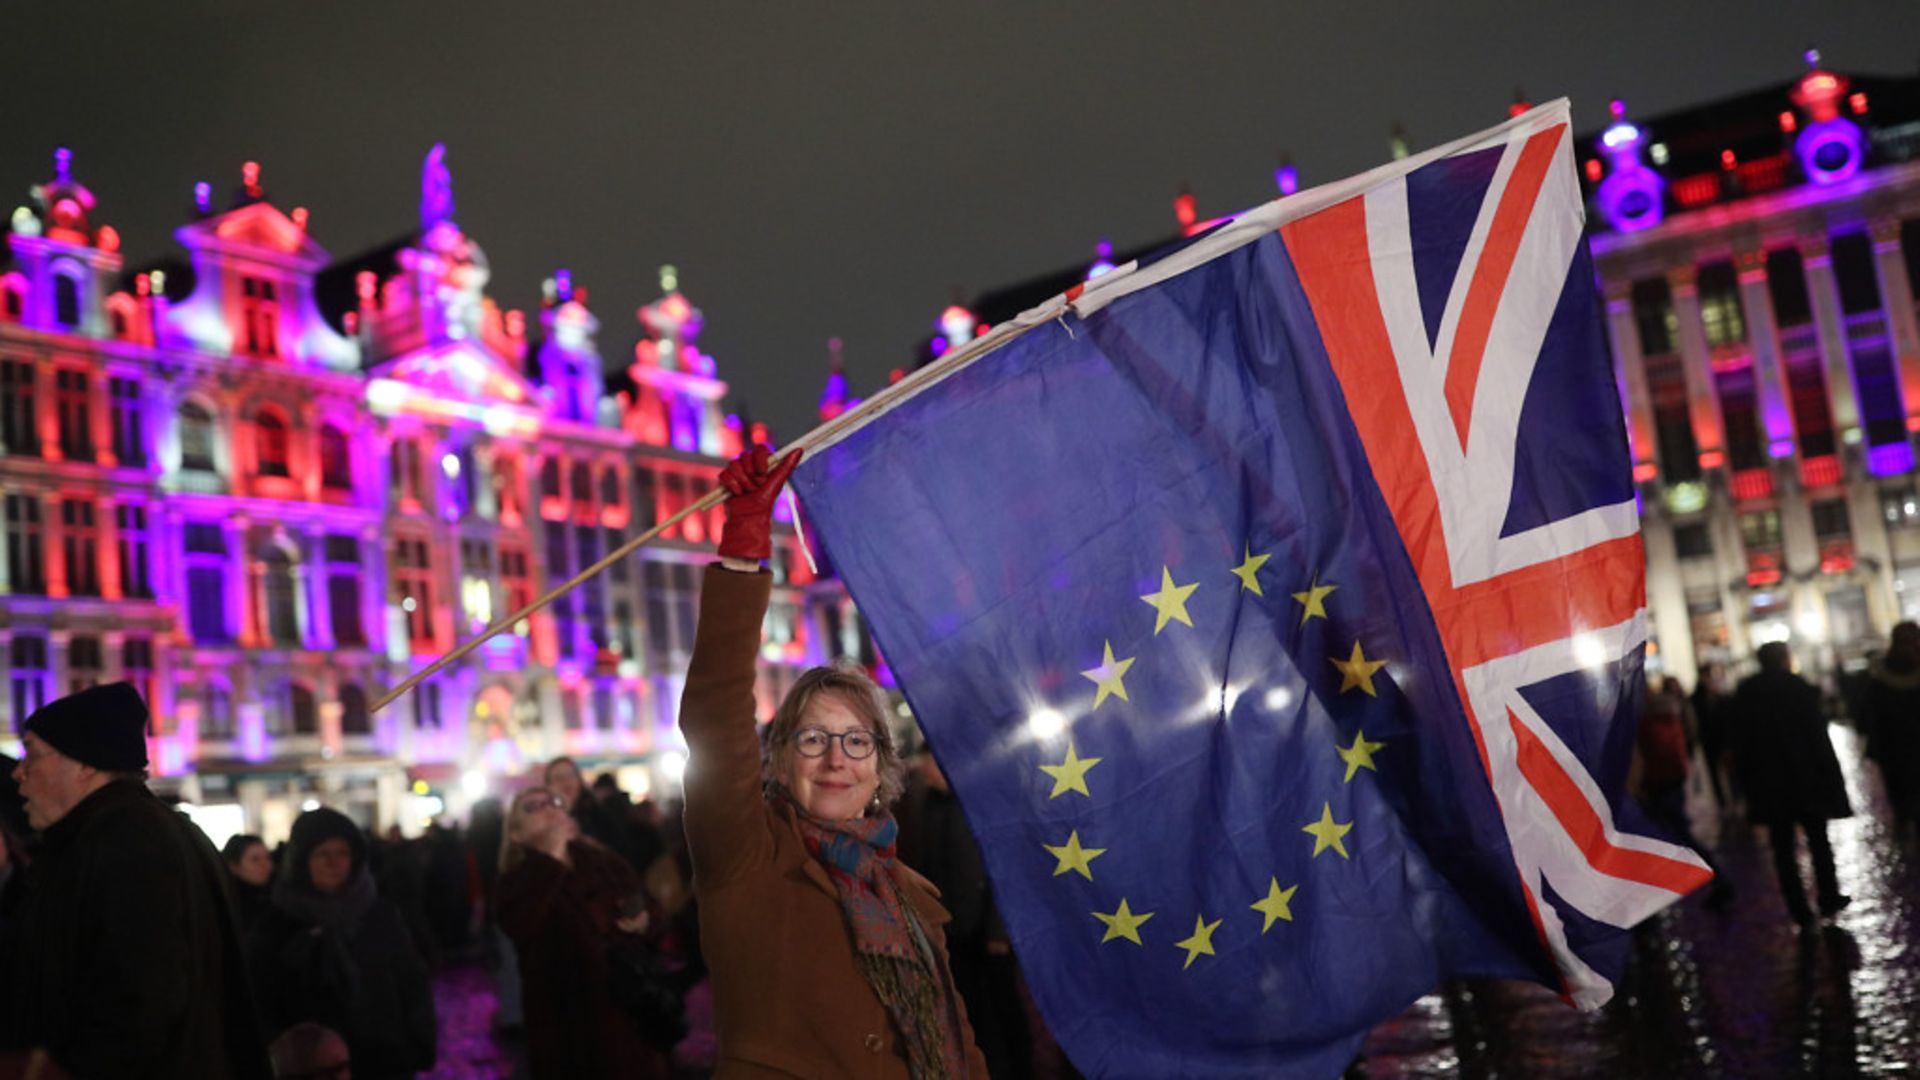 Deirdre Thomas, a resident of Belguim, waving an EU flag and a Union jack in Grand Place in Brussels, Belgium. - Credit: PA